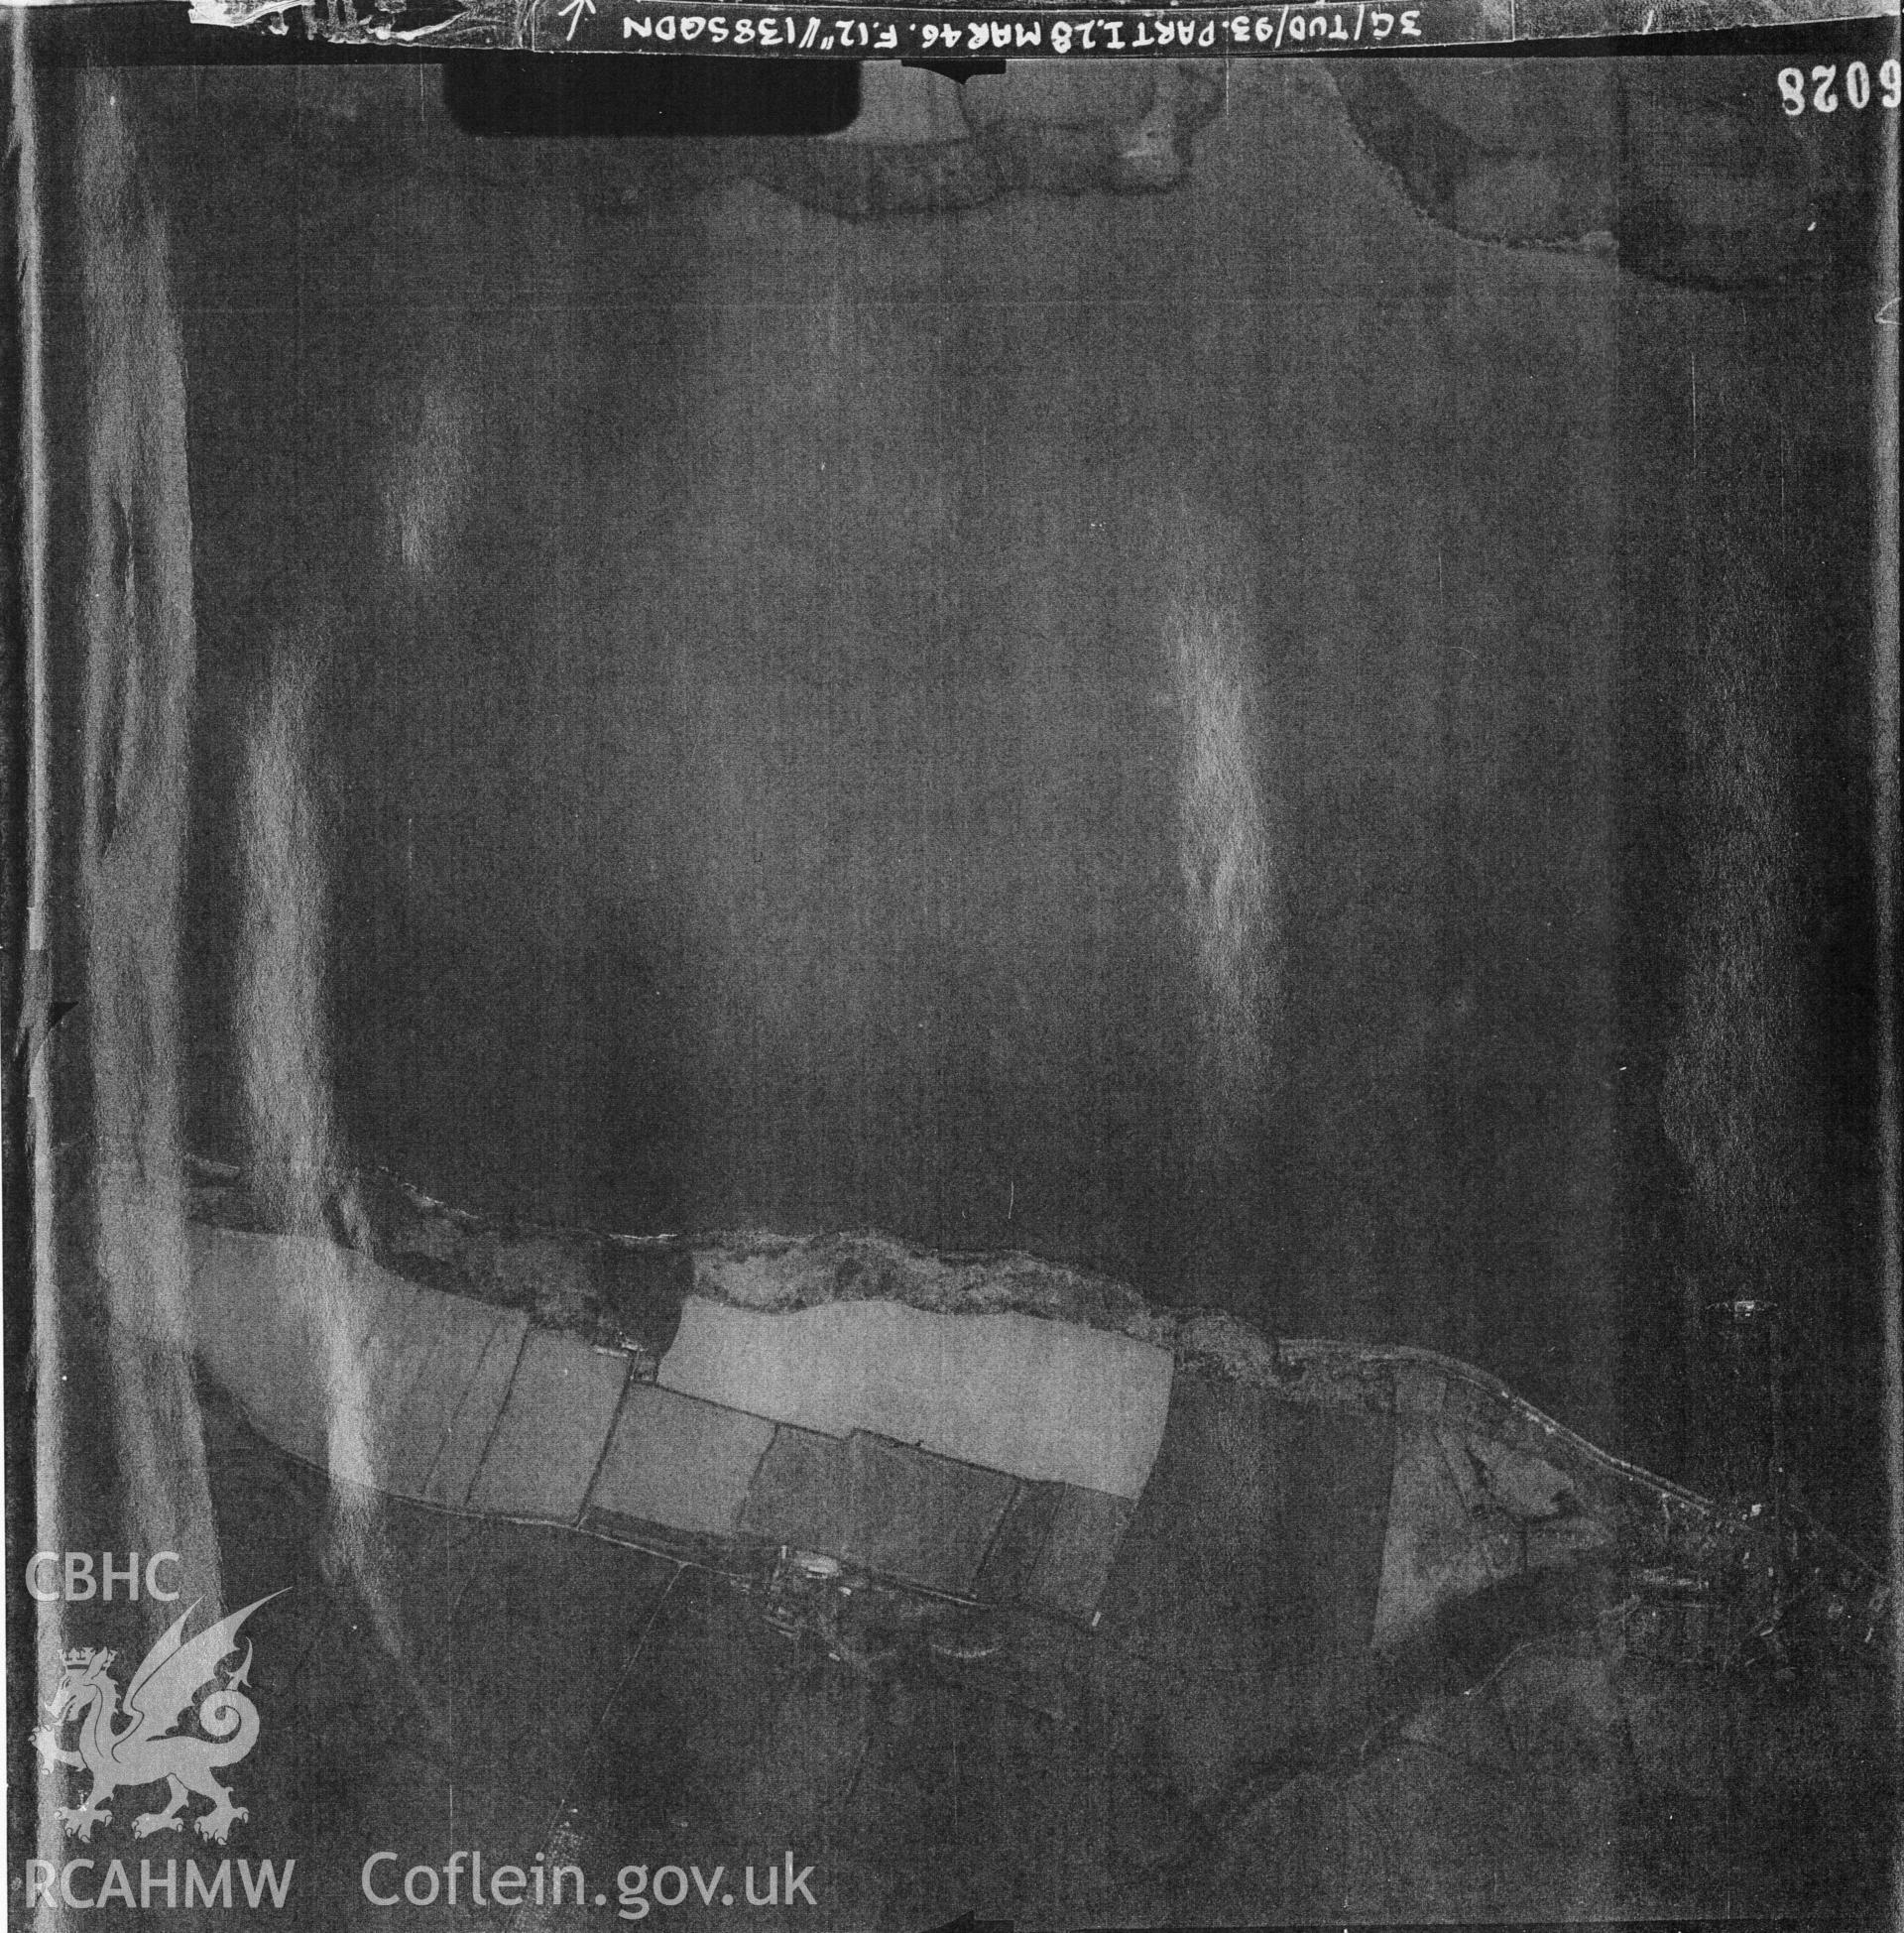 Digital copy of an aerial photograph taken in March1946, showing the assessment area.